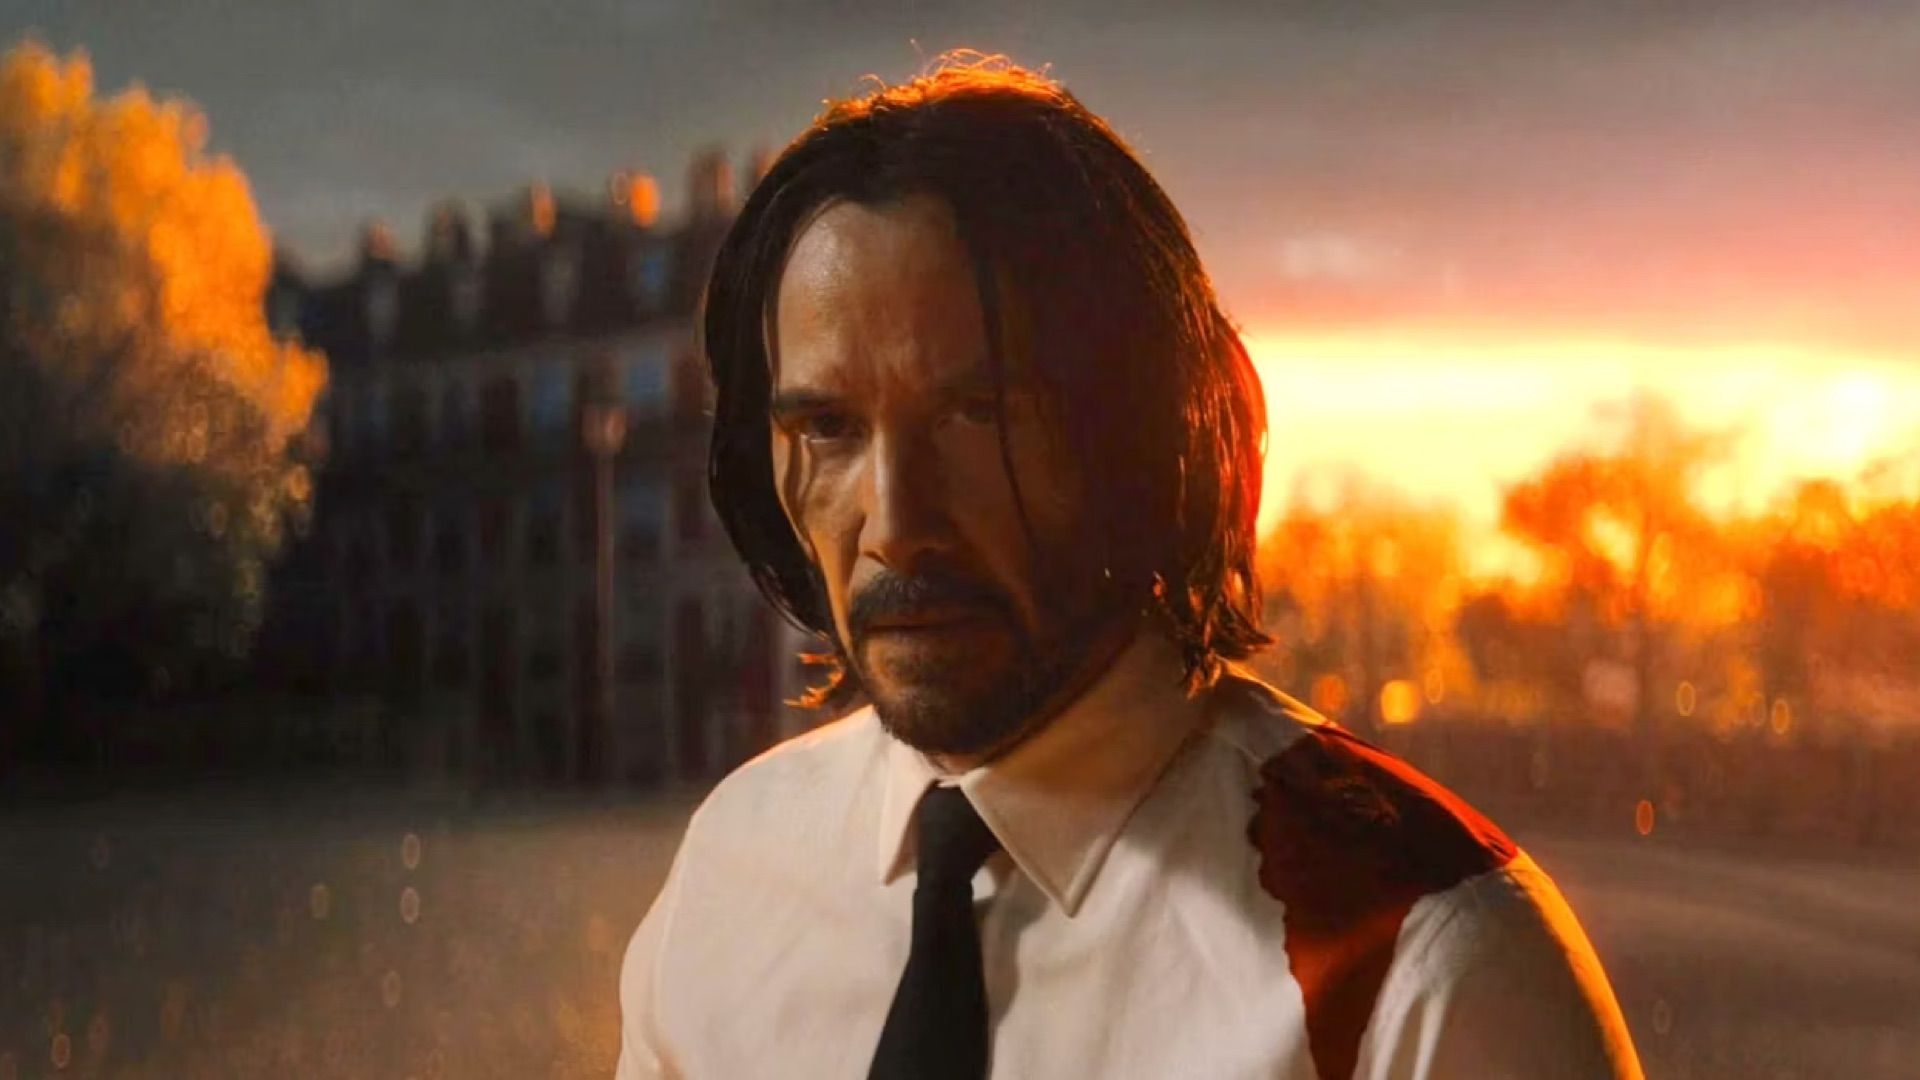 John Wick director Chad Stahelski outlines the action style of John Wick